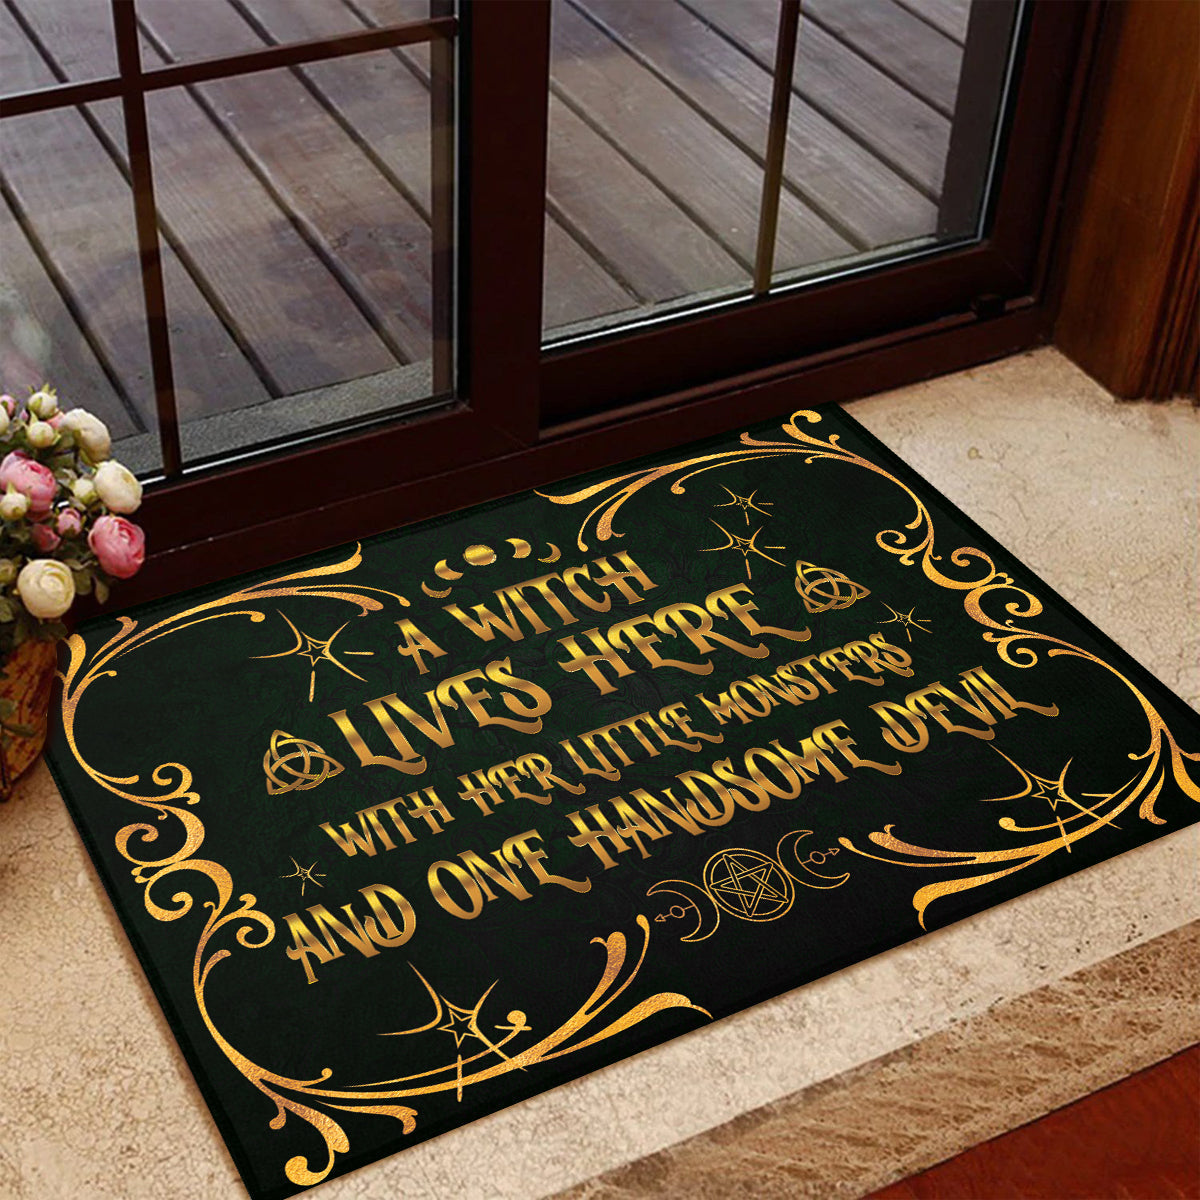 A Witch Lives Here With Her Little Monsters And One Handsome Devil - Witch Doormat 0822